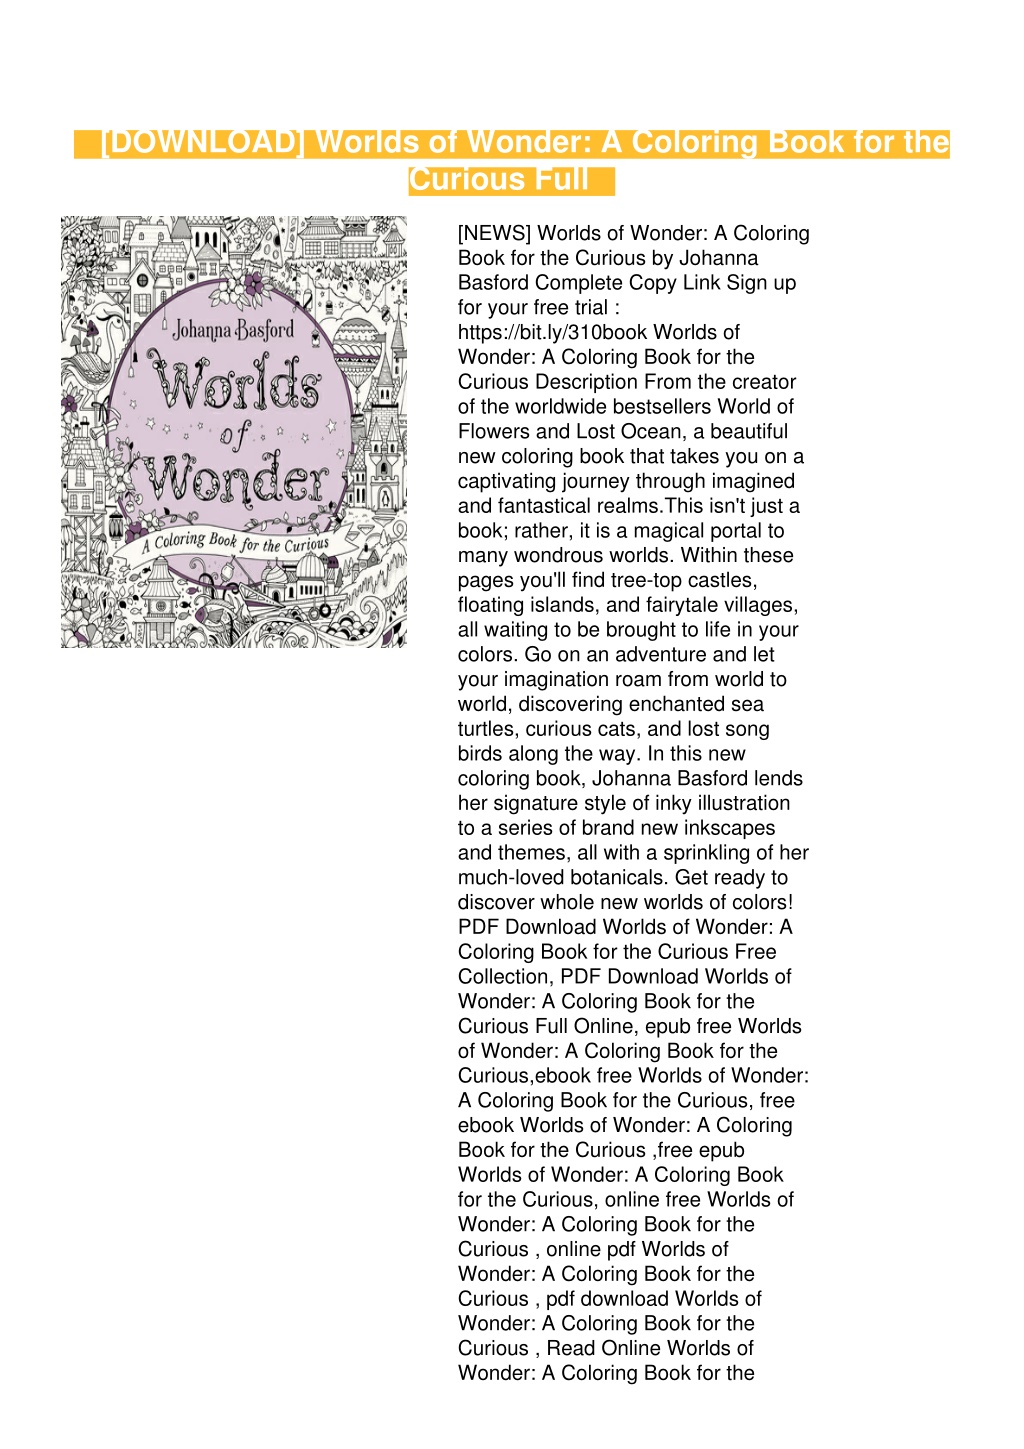 PPT - [DOWNLOAD] Worlds of Wonder: A Coloring Book for the Curious Full